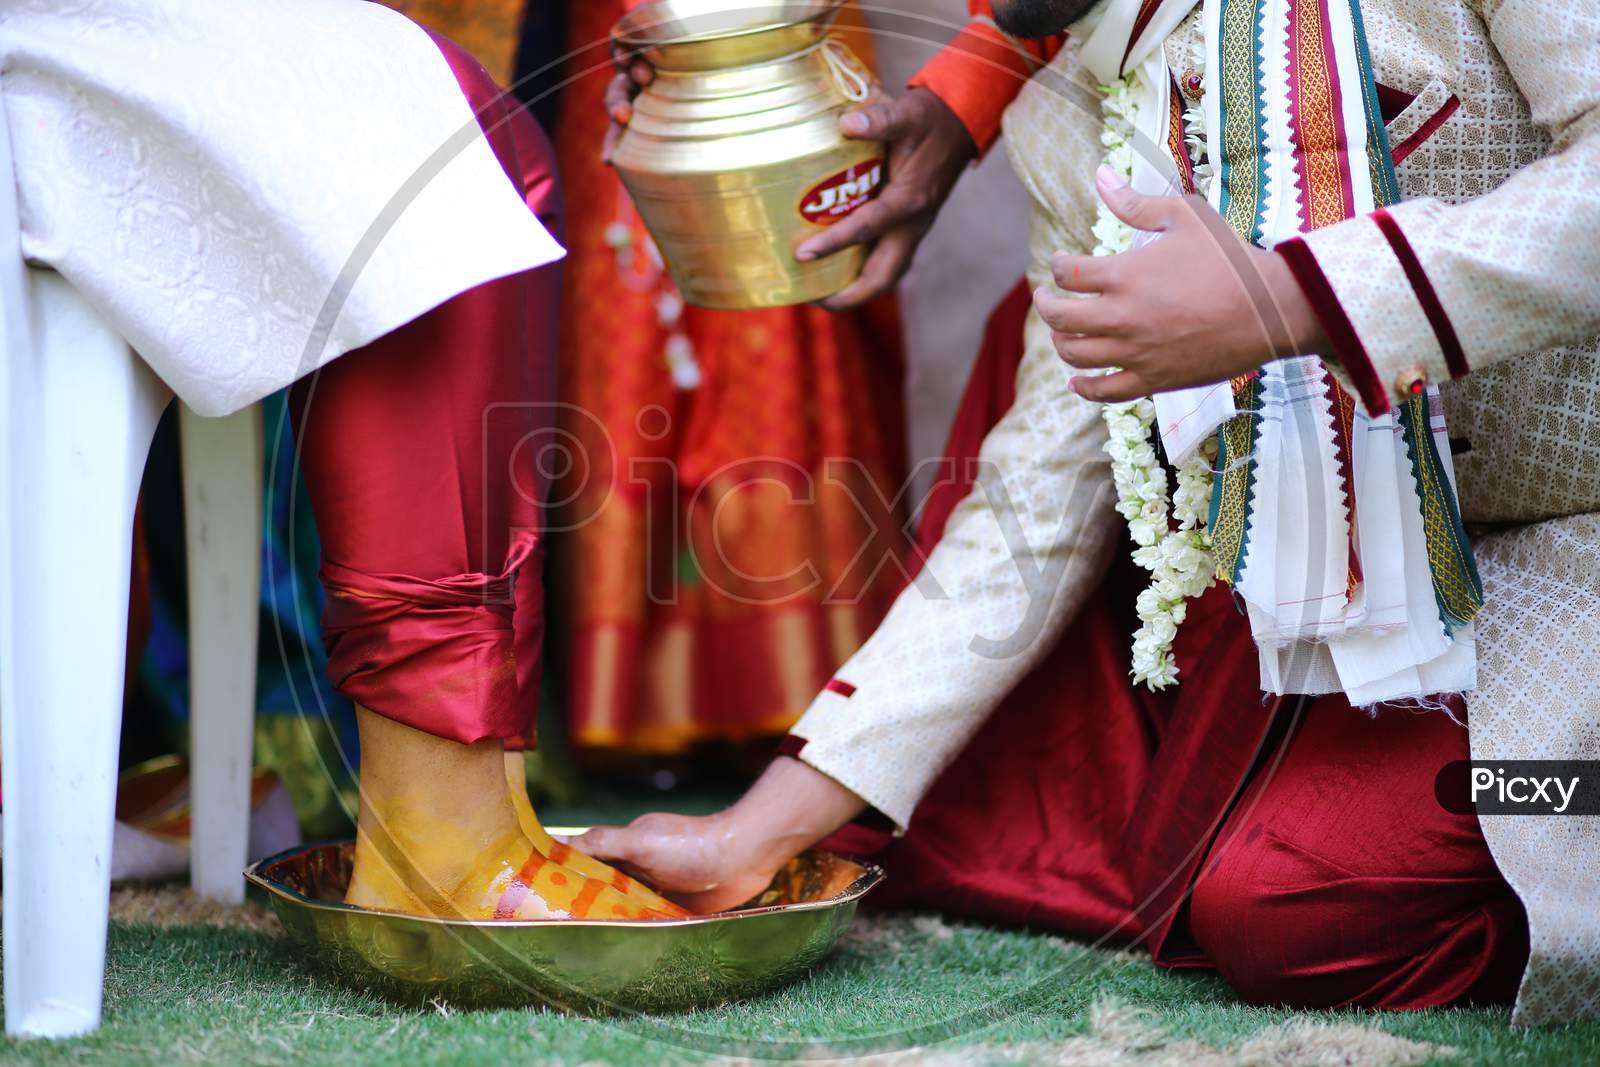 South Indian Wedding Rituals Washing Grooms Legs At An Hindu Wedding Ceremony